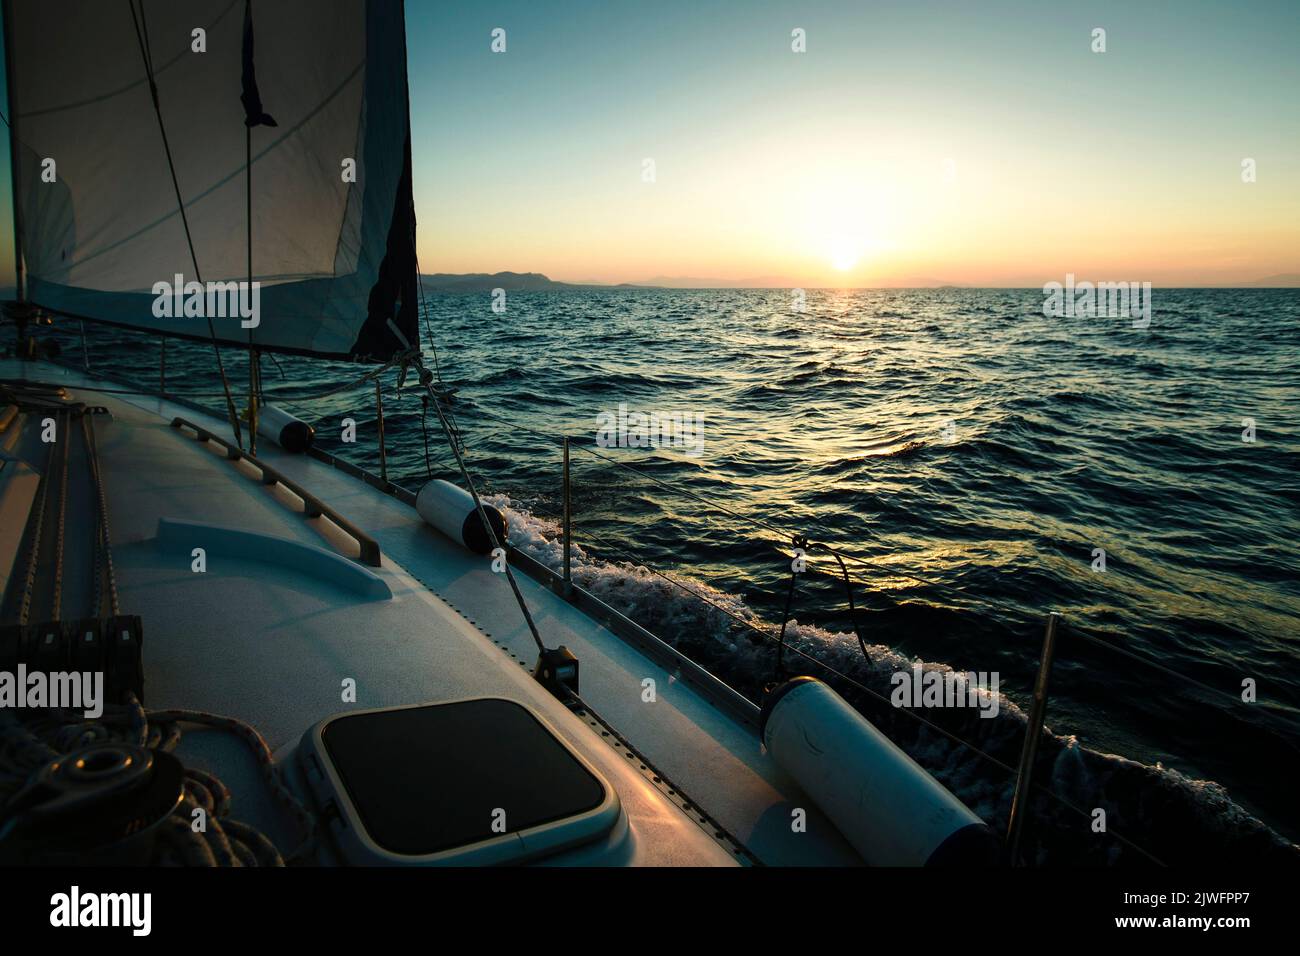 Sailing yacht boat in the Sea during amazing sunset. Stock Photo